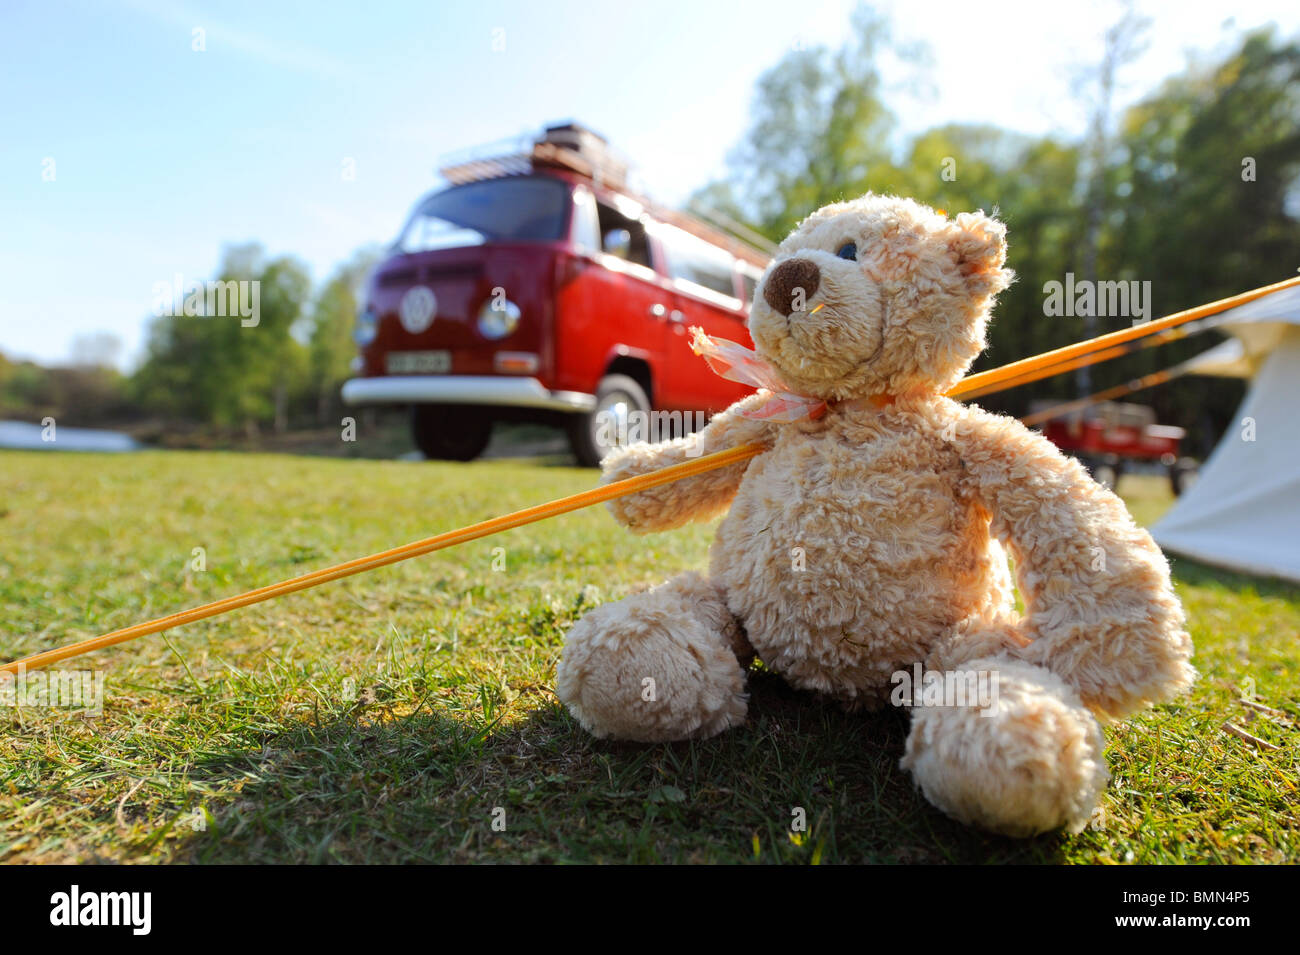 A teddy bear enjoying a camping holiday in a bright red classic VW campervan. Stock Photo